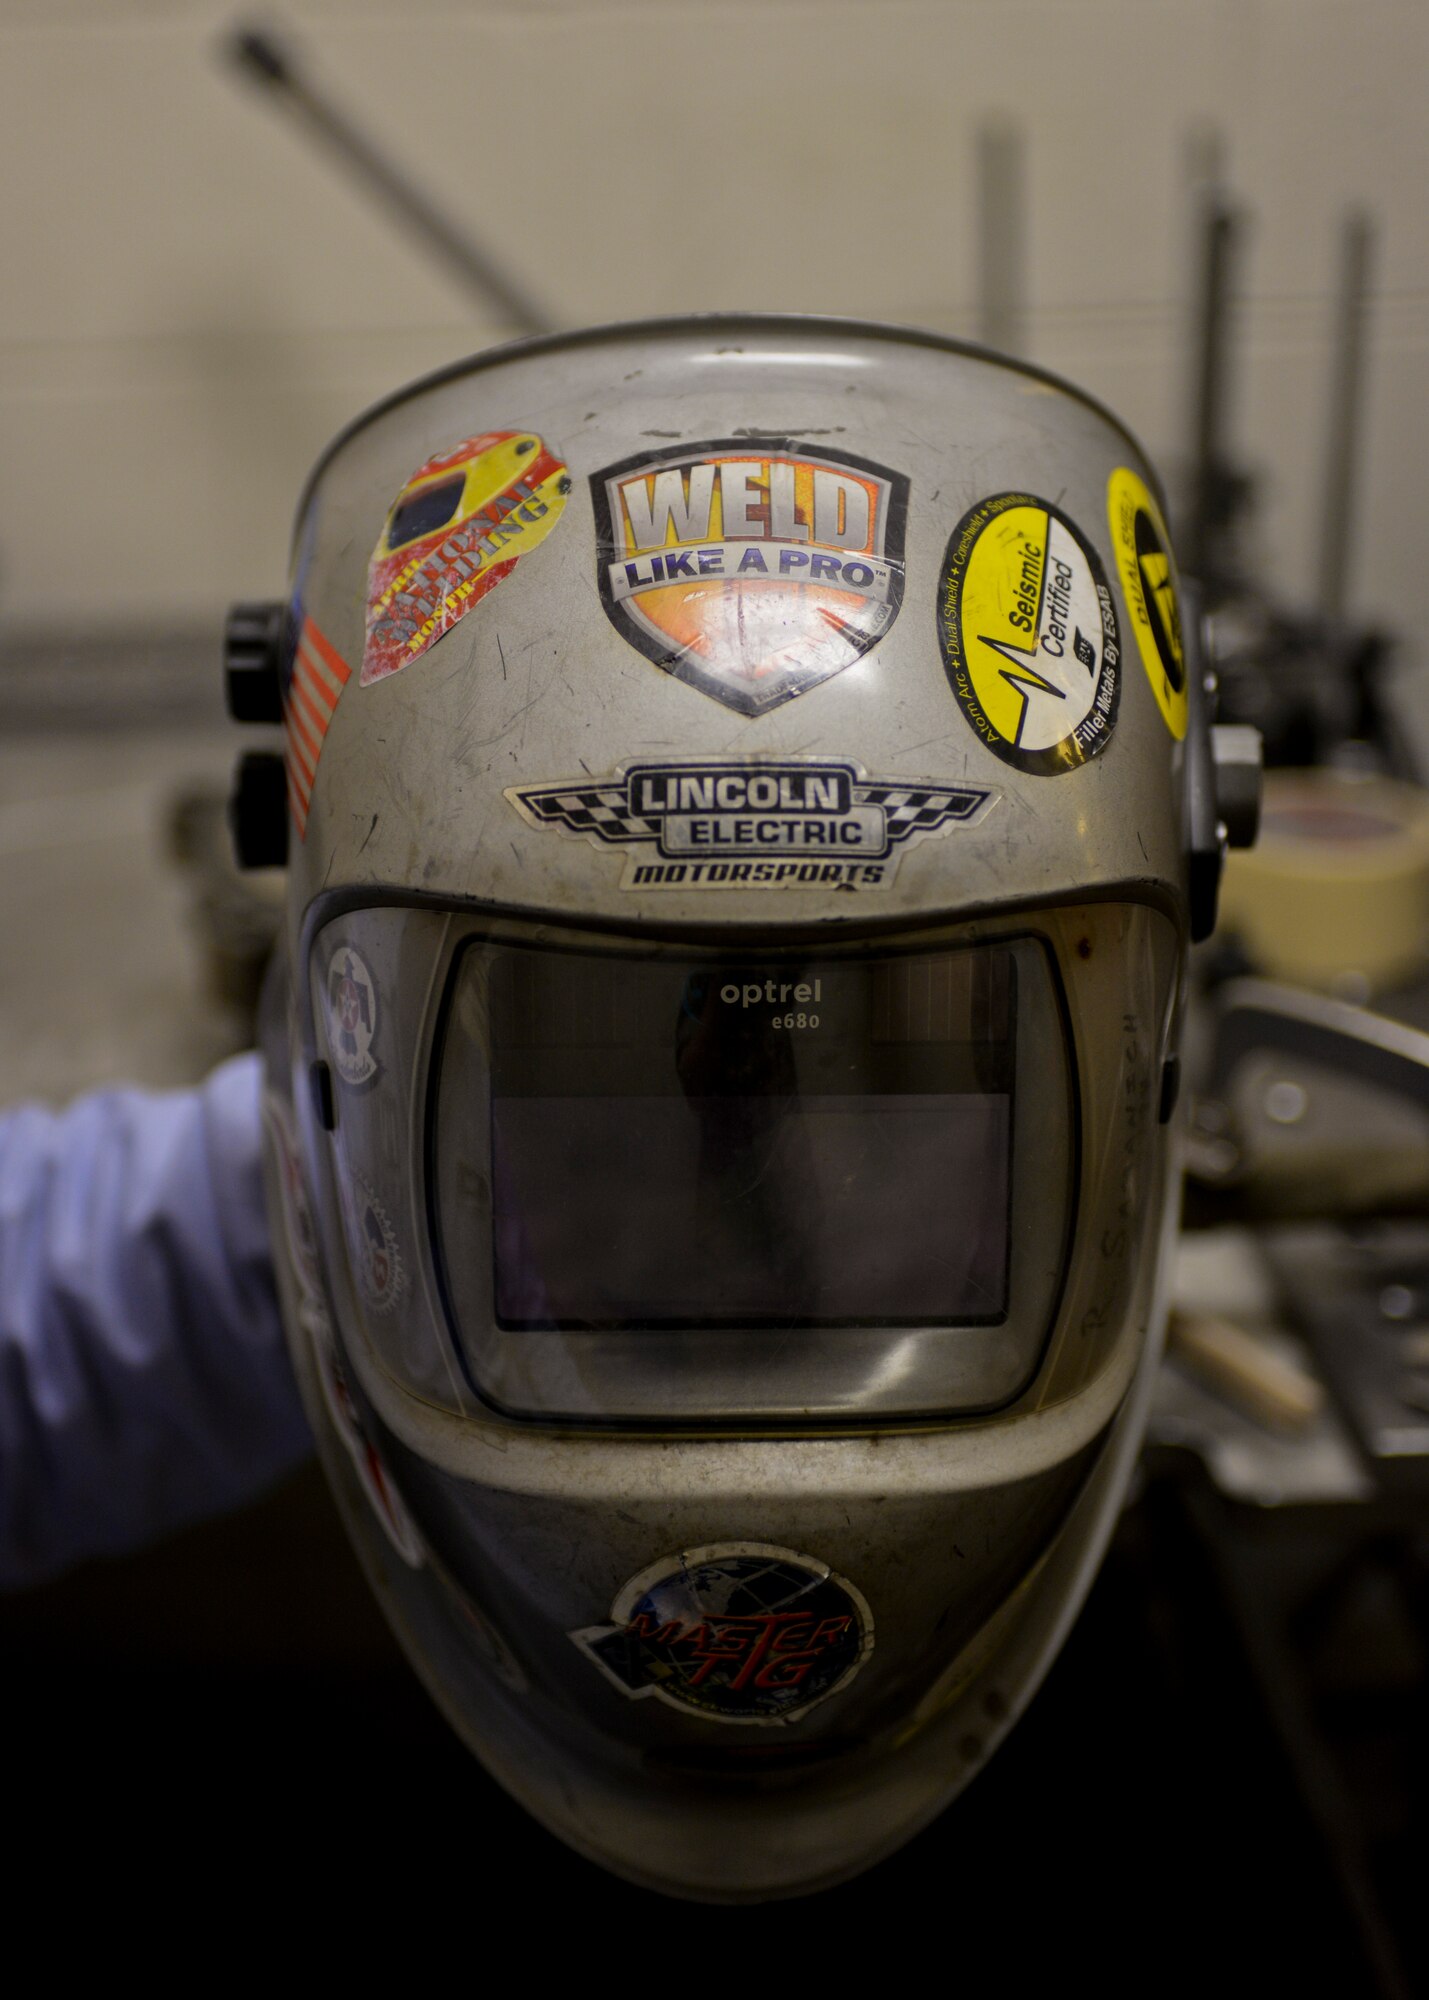 Rich Samanich, 57th Maintanence Group aircraft metals technology lead, holds up his welding helmet at the Aircratft Metals Tecnology shop on Nellis Air Force Base, Nev., Sept. 3, 2015. Metals technology workers have to don protective gear to avoid possible injury. (U.S. Air Force photo by Airman 1st Class Mikaley Kline)
